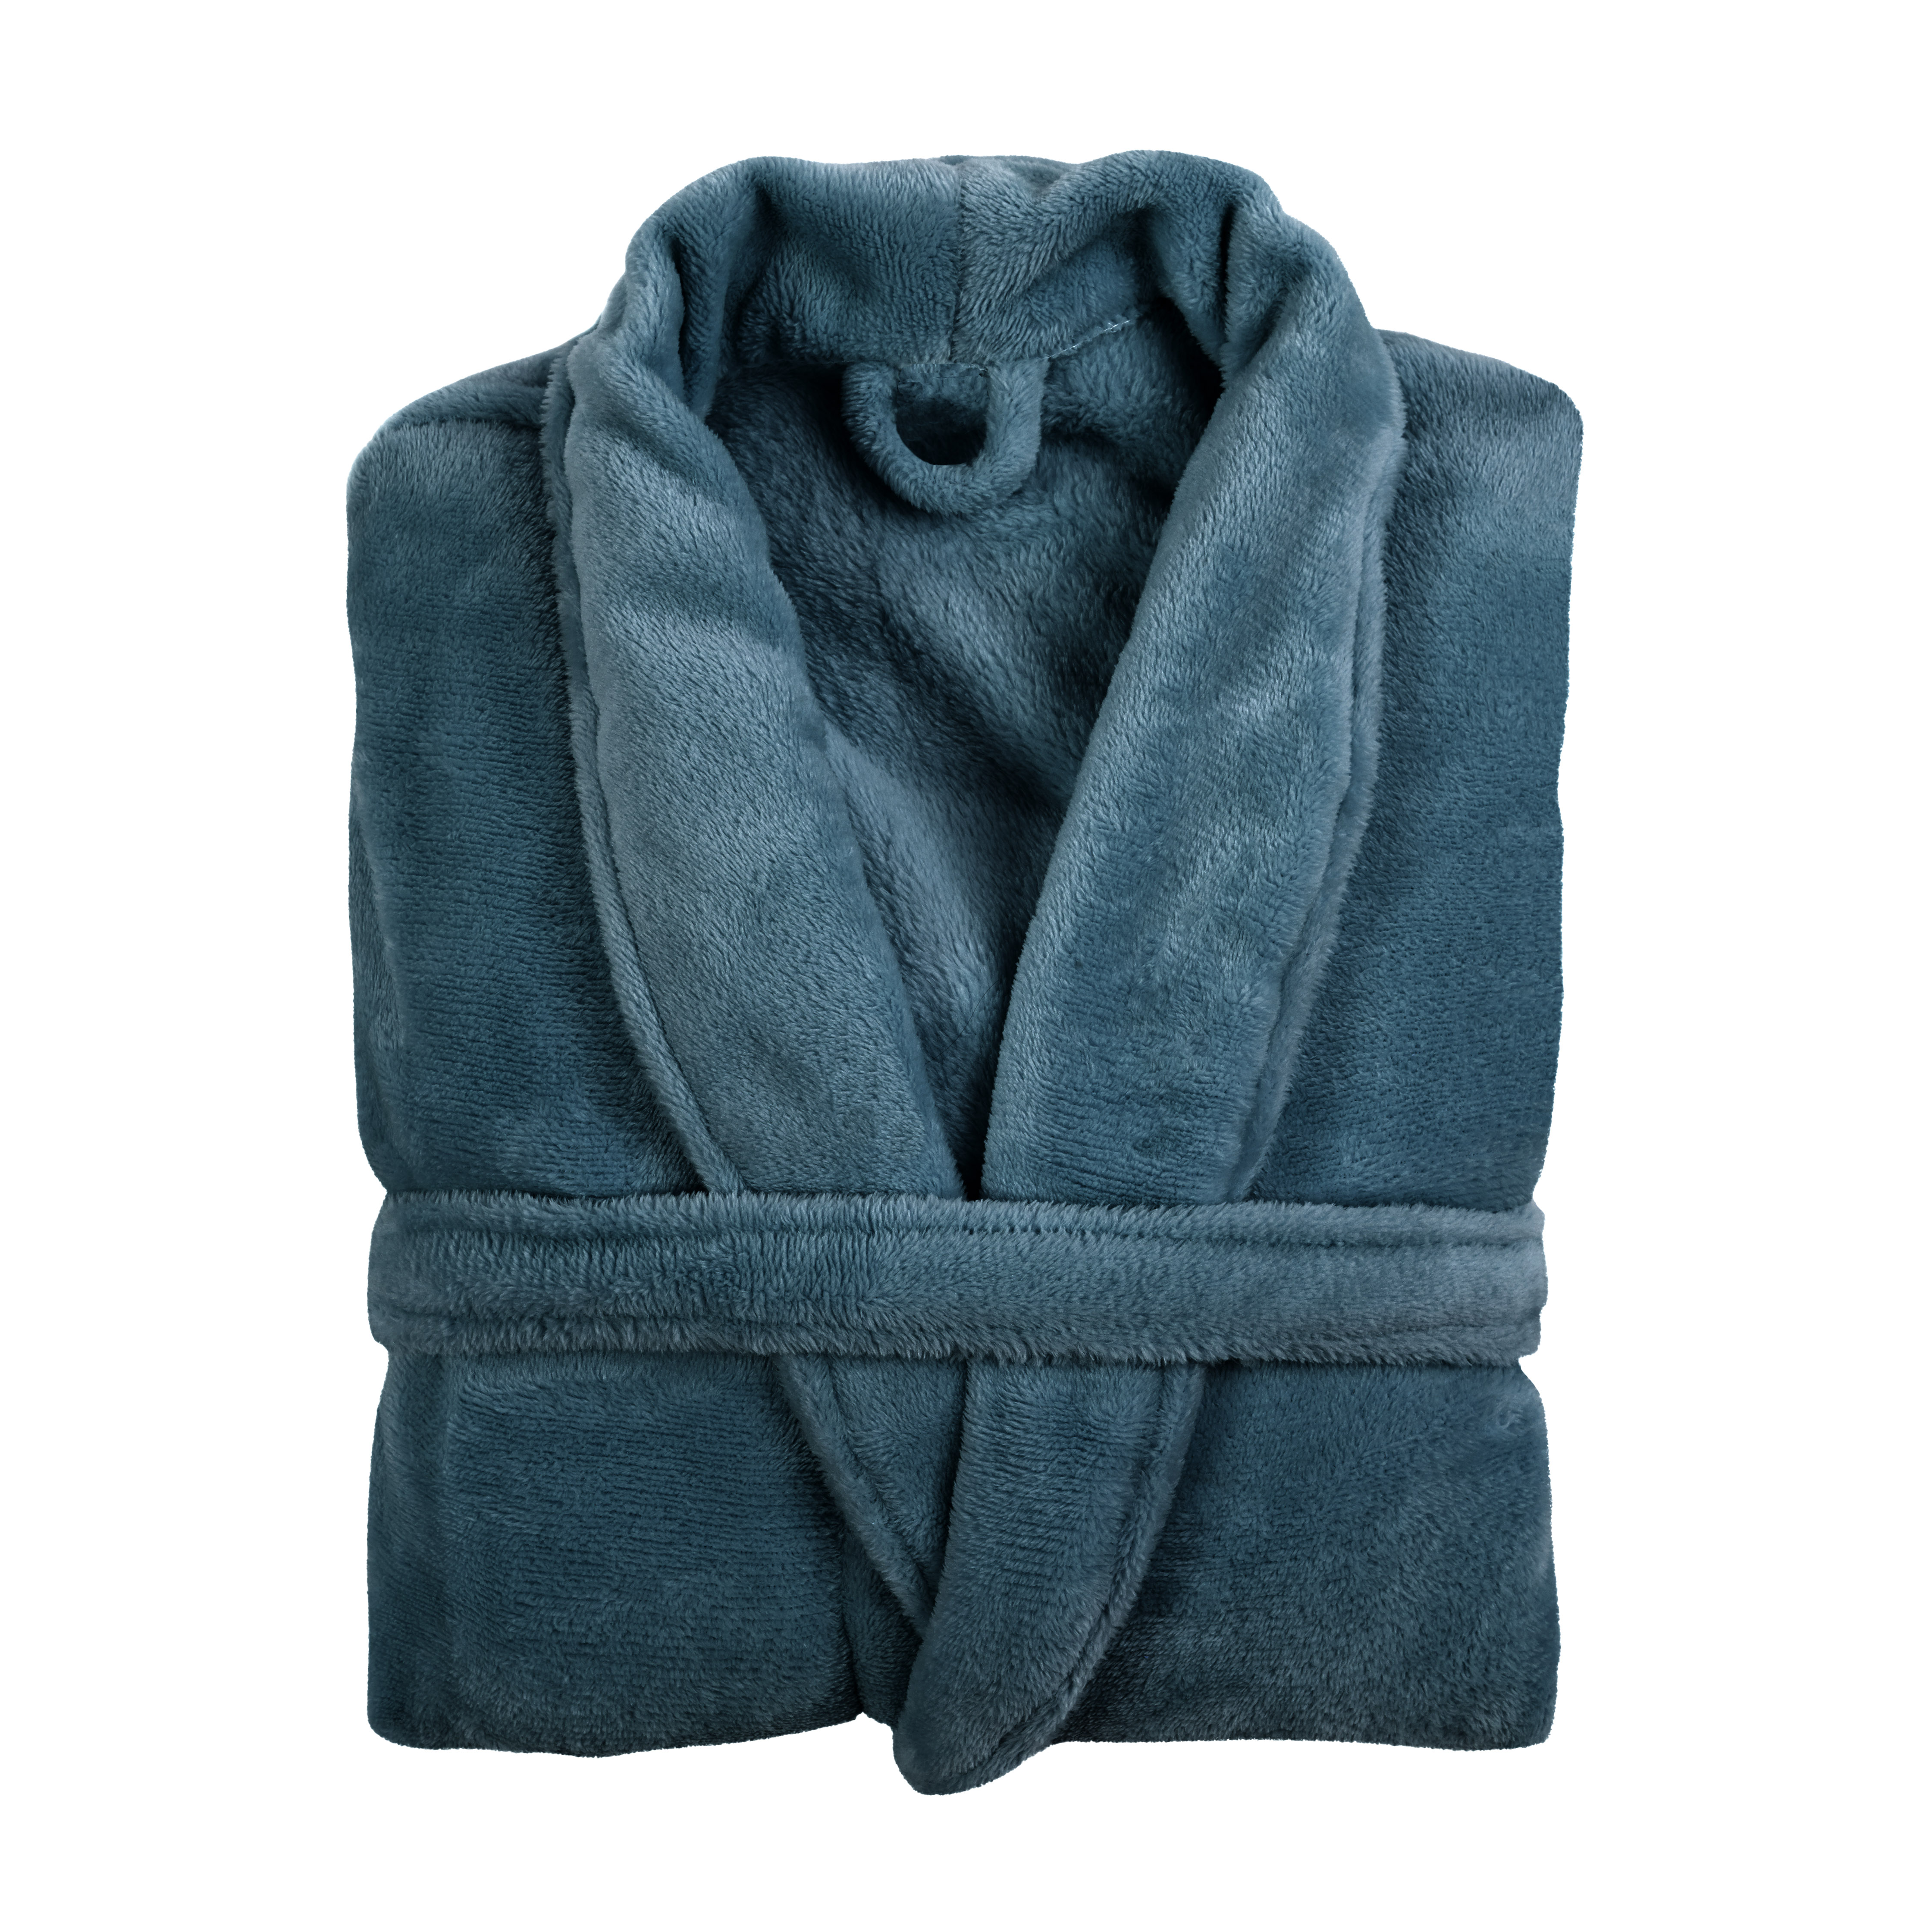 Badjas COSY microflannel- S/M - unisex, blue fusion